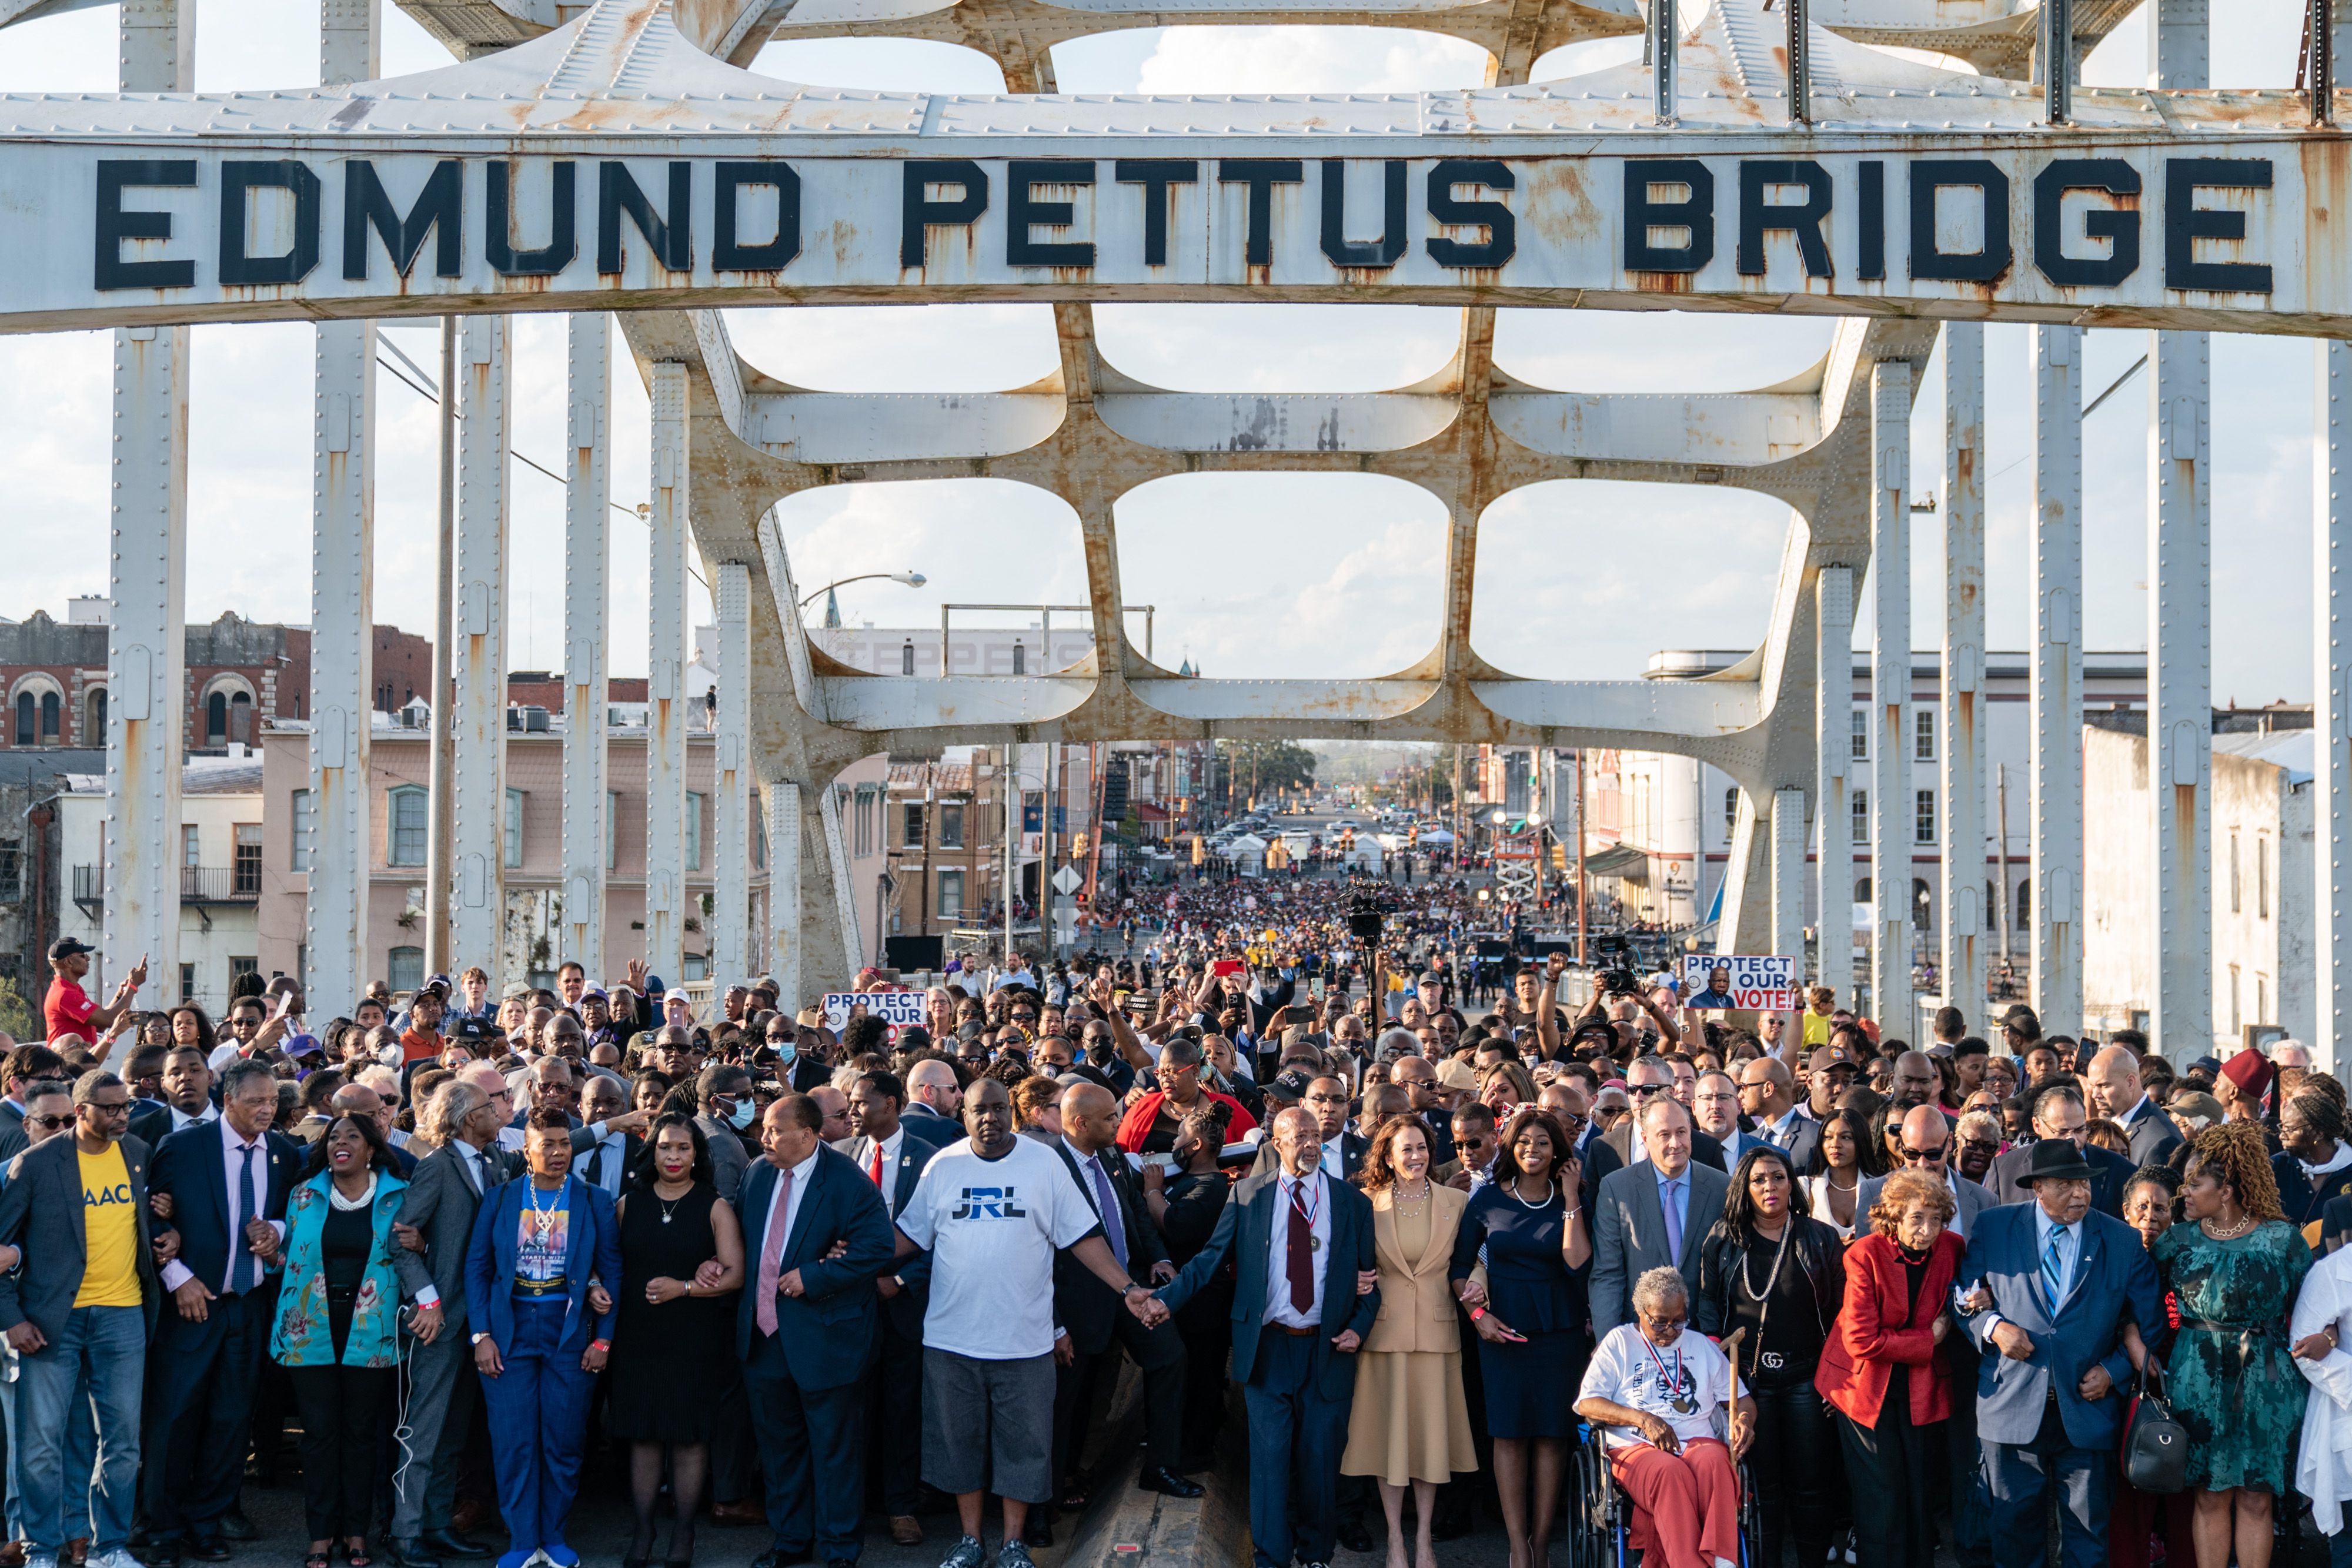 Kamala Harris says “we will march on” as she commemorates “Bloody Sunday” in Selma – Green Reporter